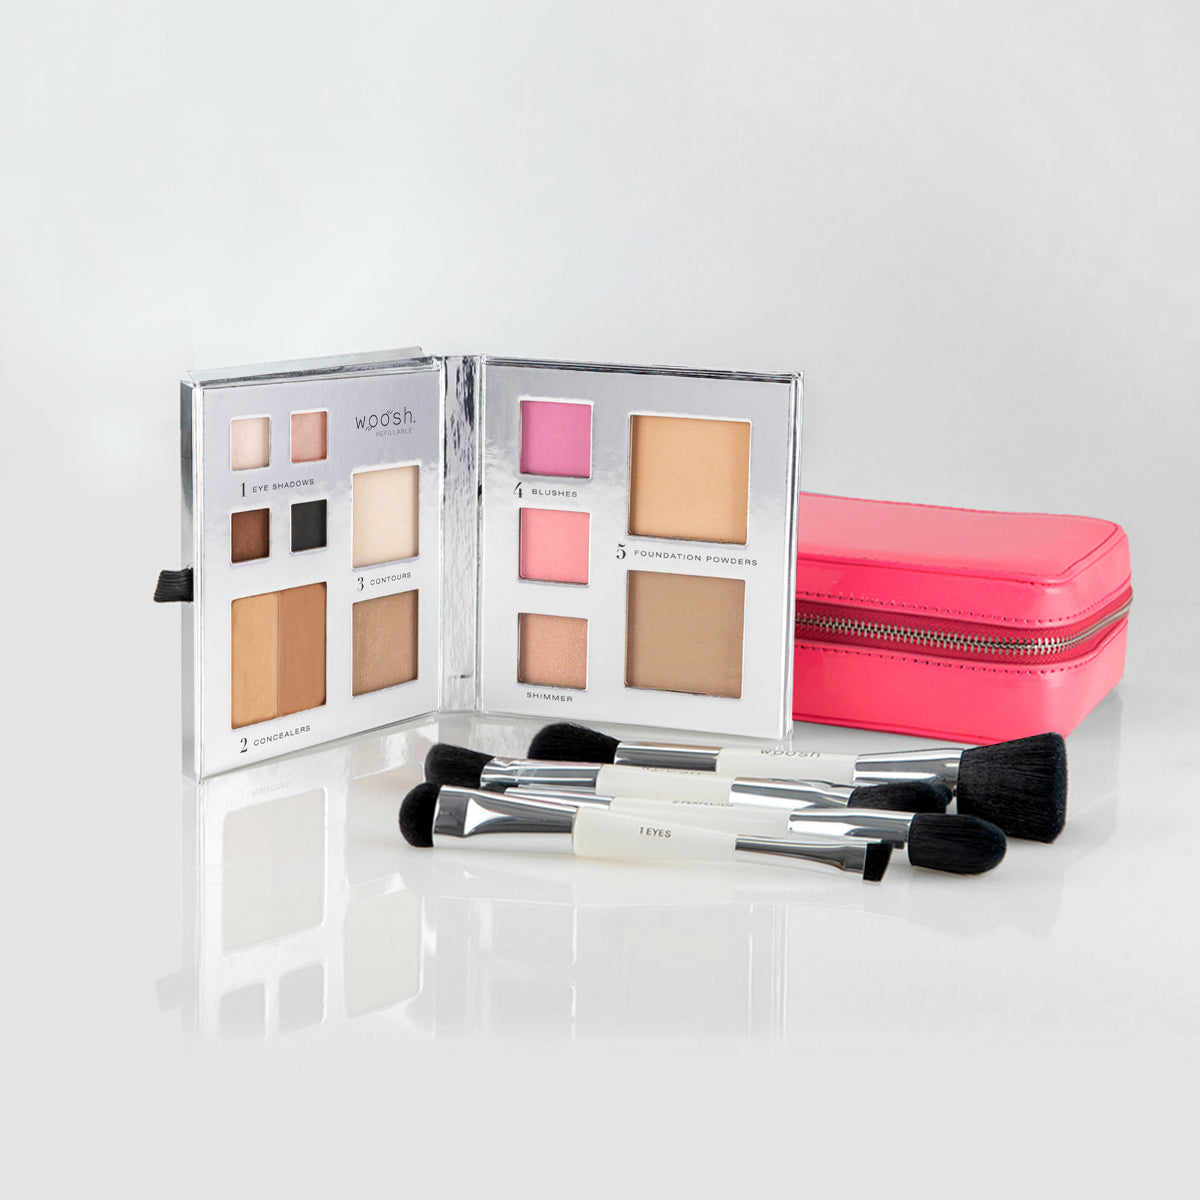 The Jetsetter makeup bundle includes a Fold Out Face 13 pan palette, pink case, and essential brush set with 4 dual-ended brushes